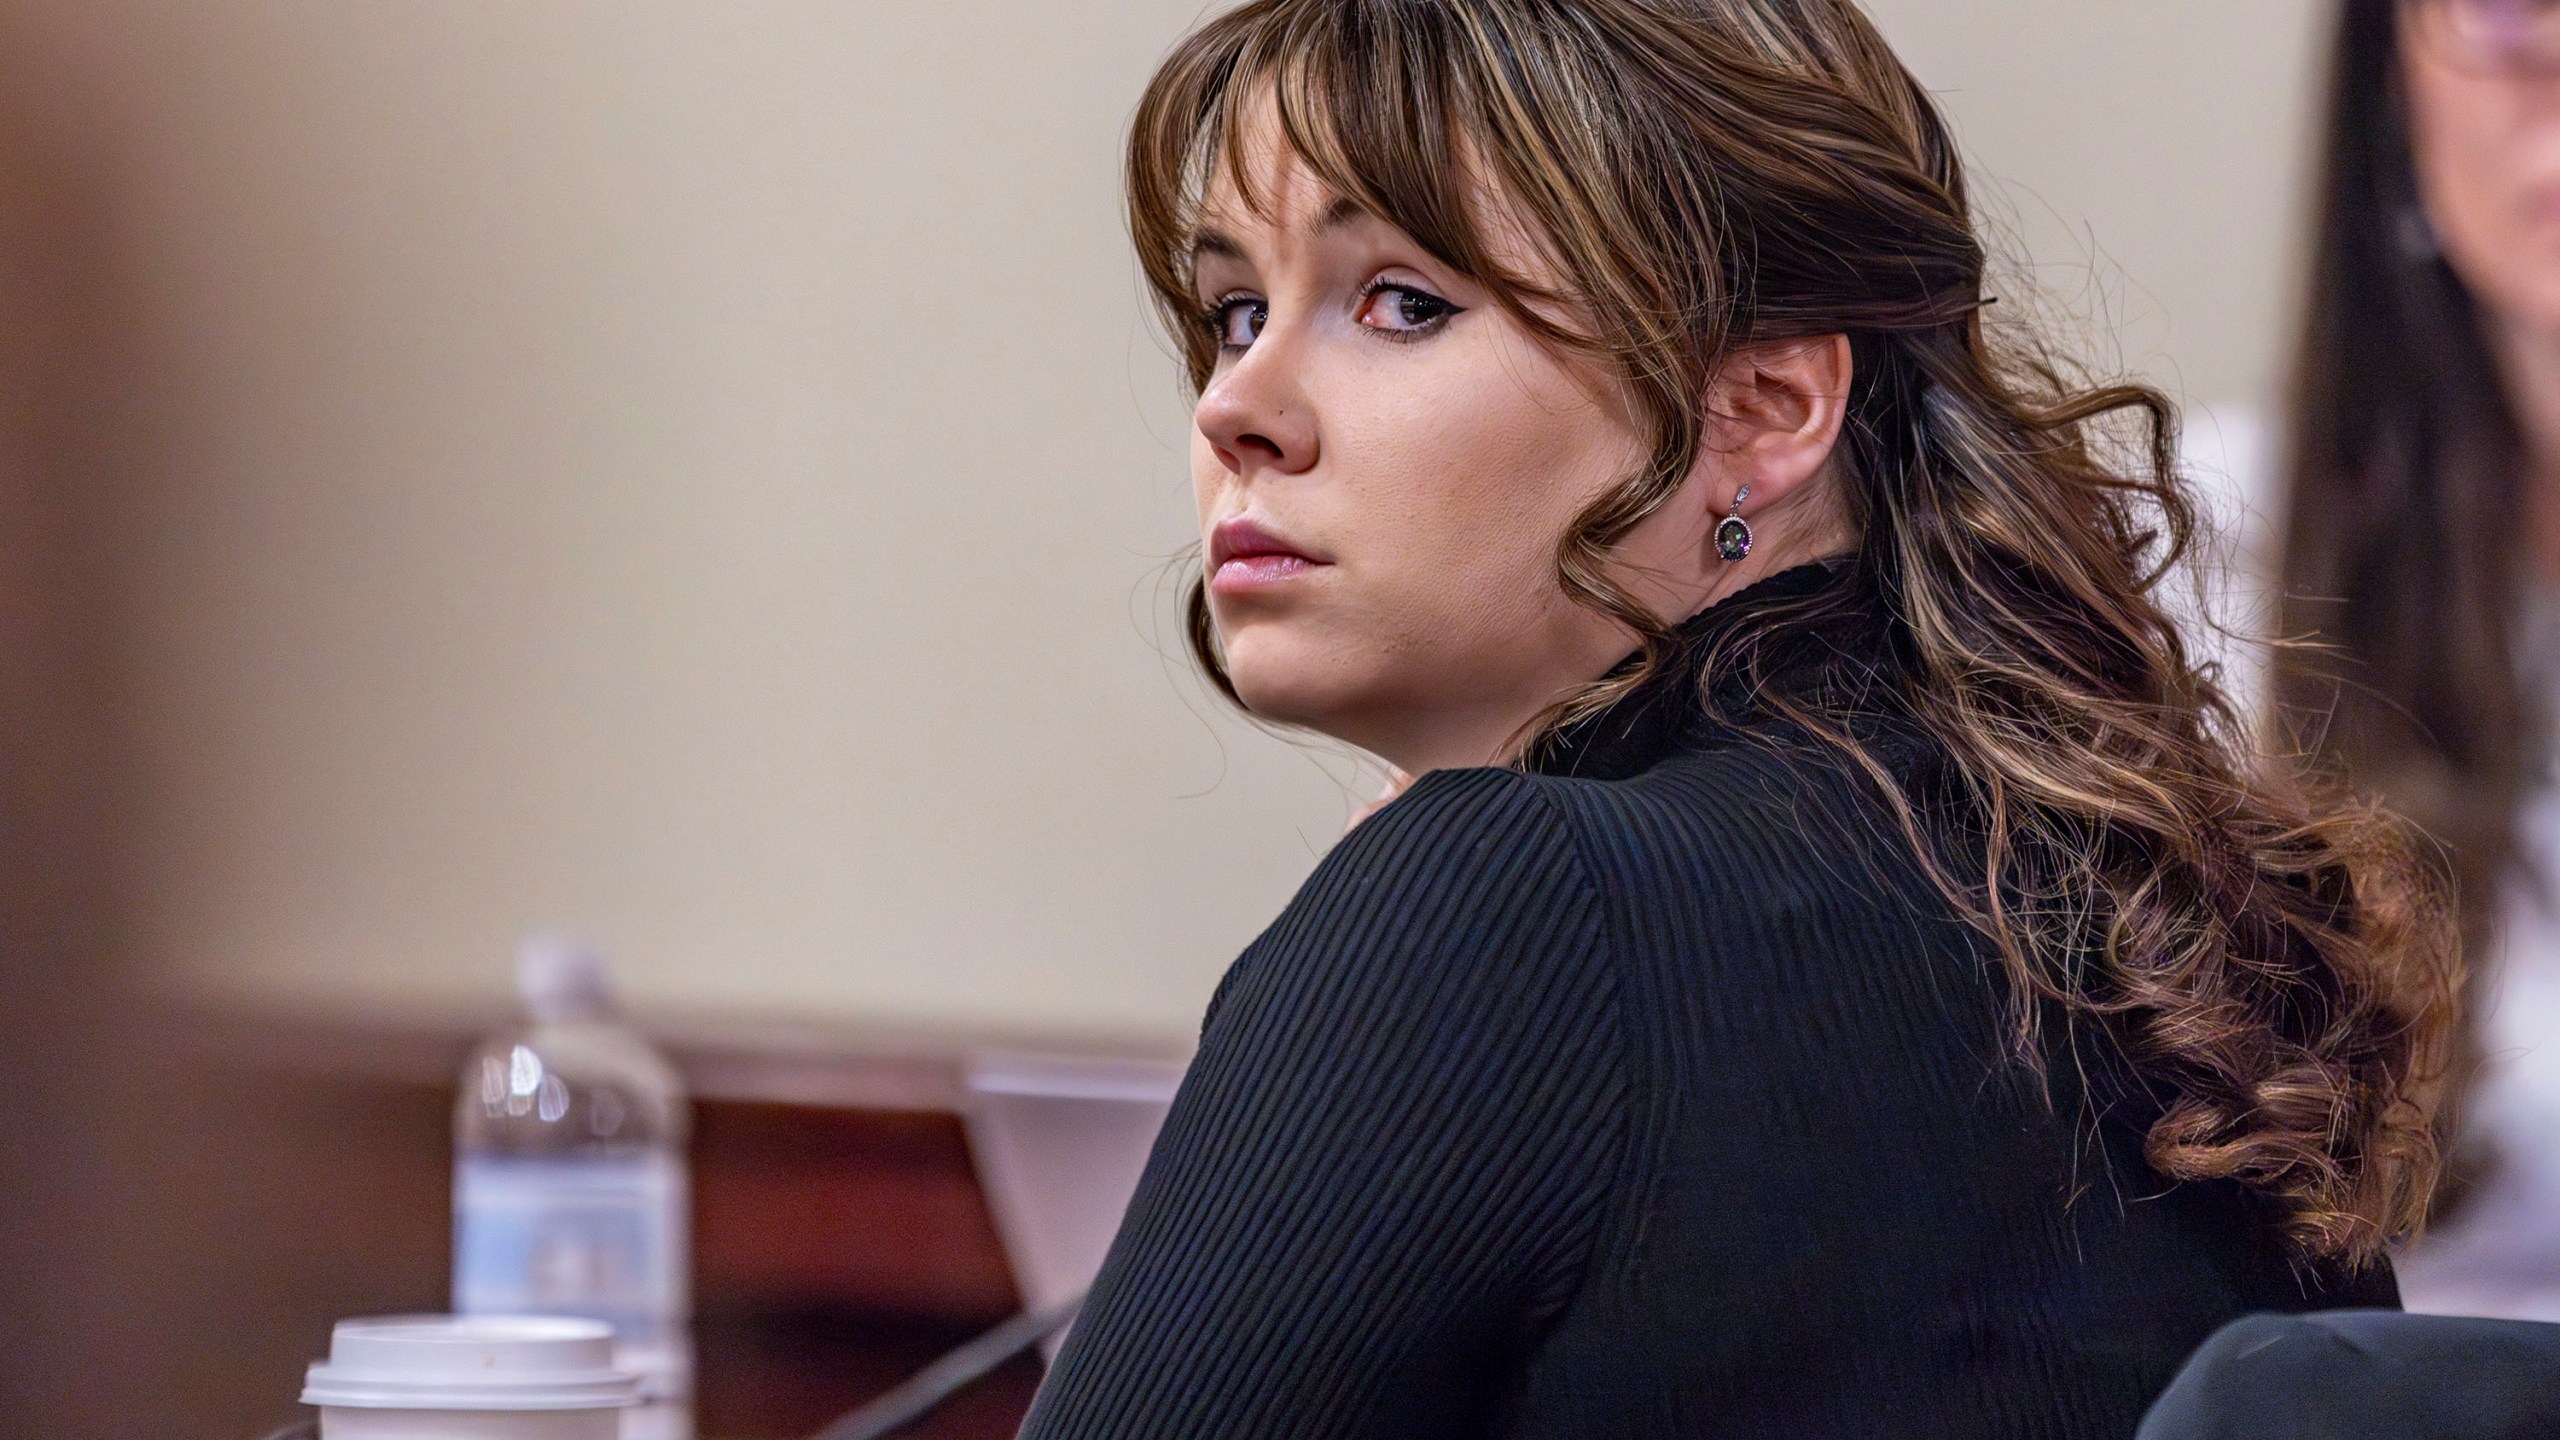 Hannah Gutierrez-Reed, the former armorer at the movie "Rust", listens to closing arguments in her trial at district court on Wednesday, March 6, 2024, in Santa Fe, N.M. (Luis Sánchez Saturno/Santa Fe New Mexican via AP, Pool)